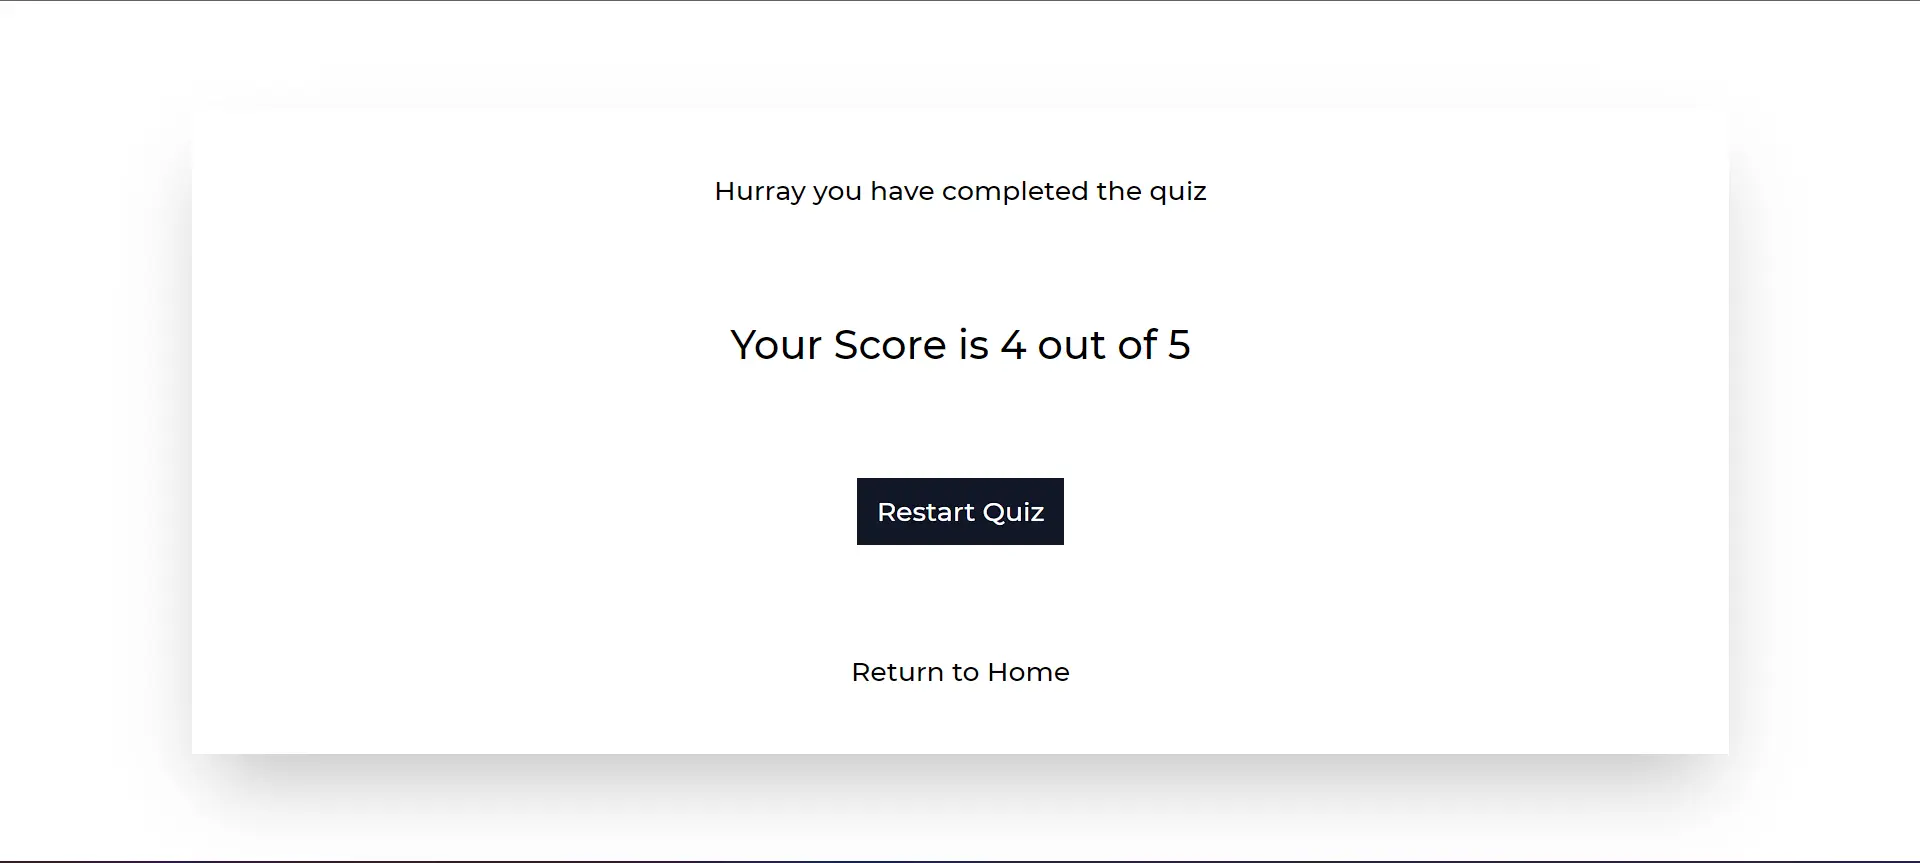 End quiz results page.